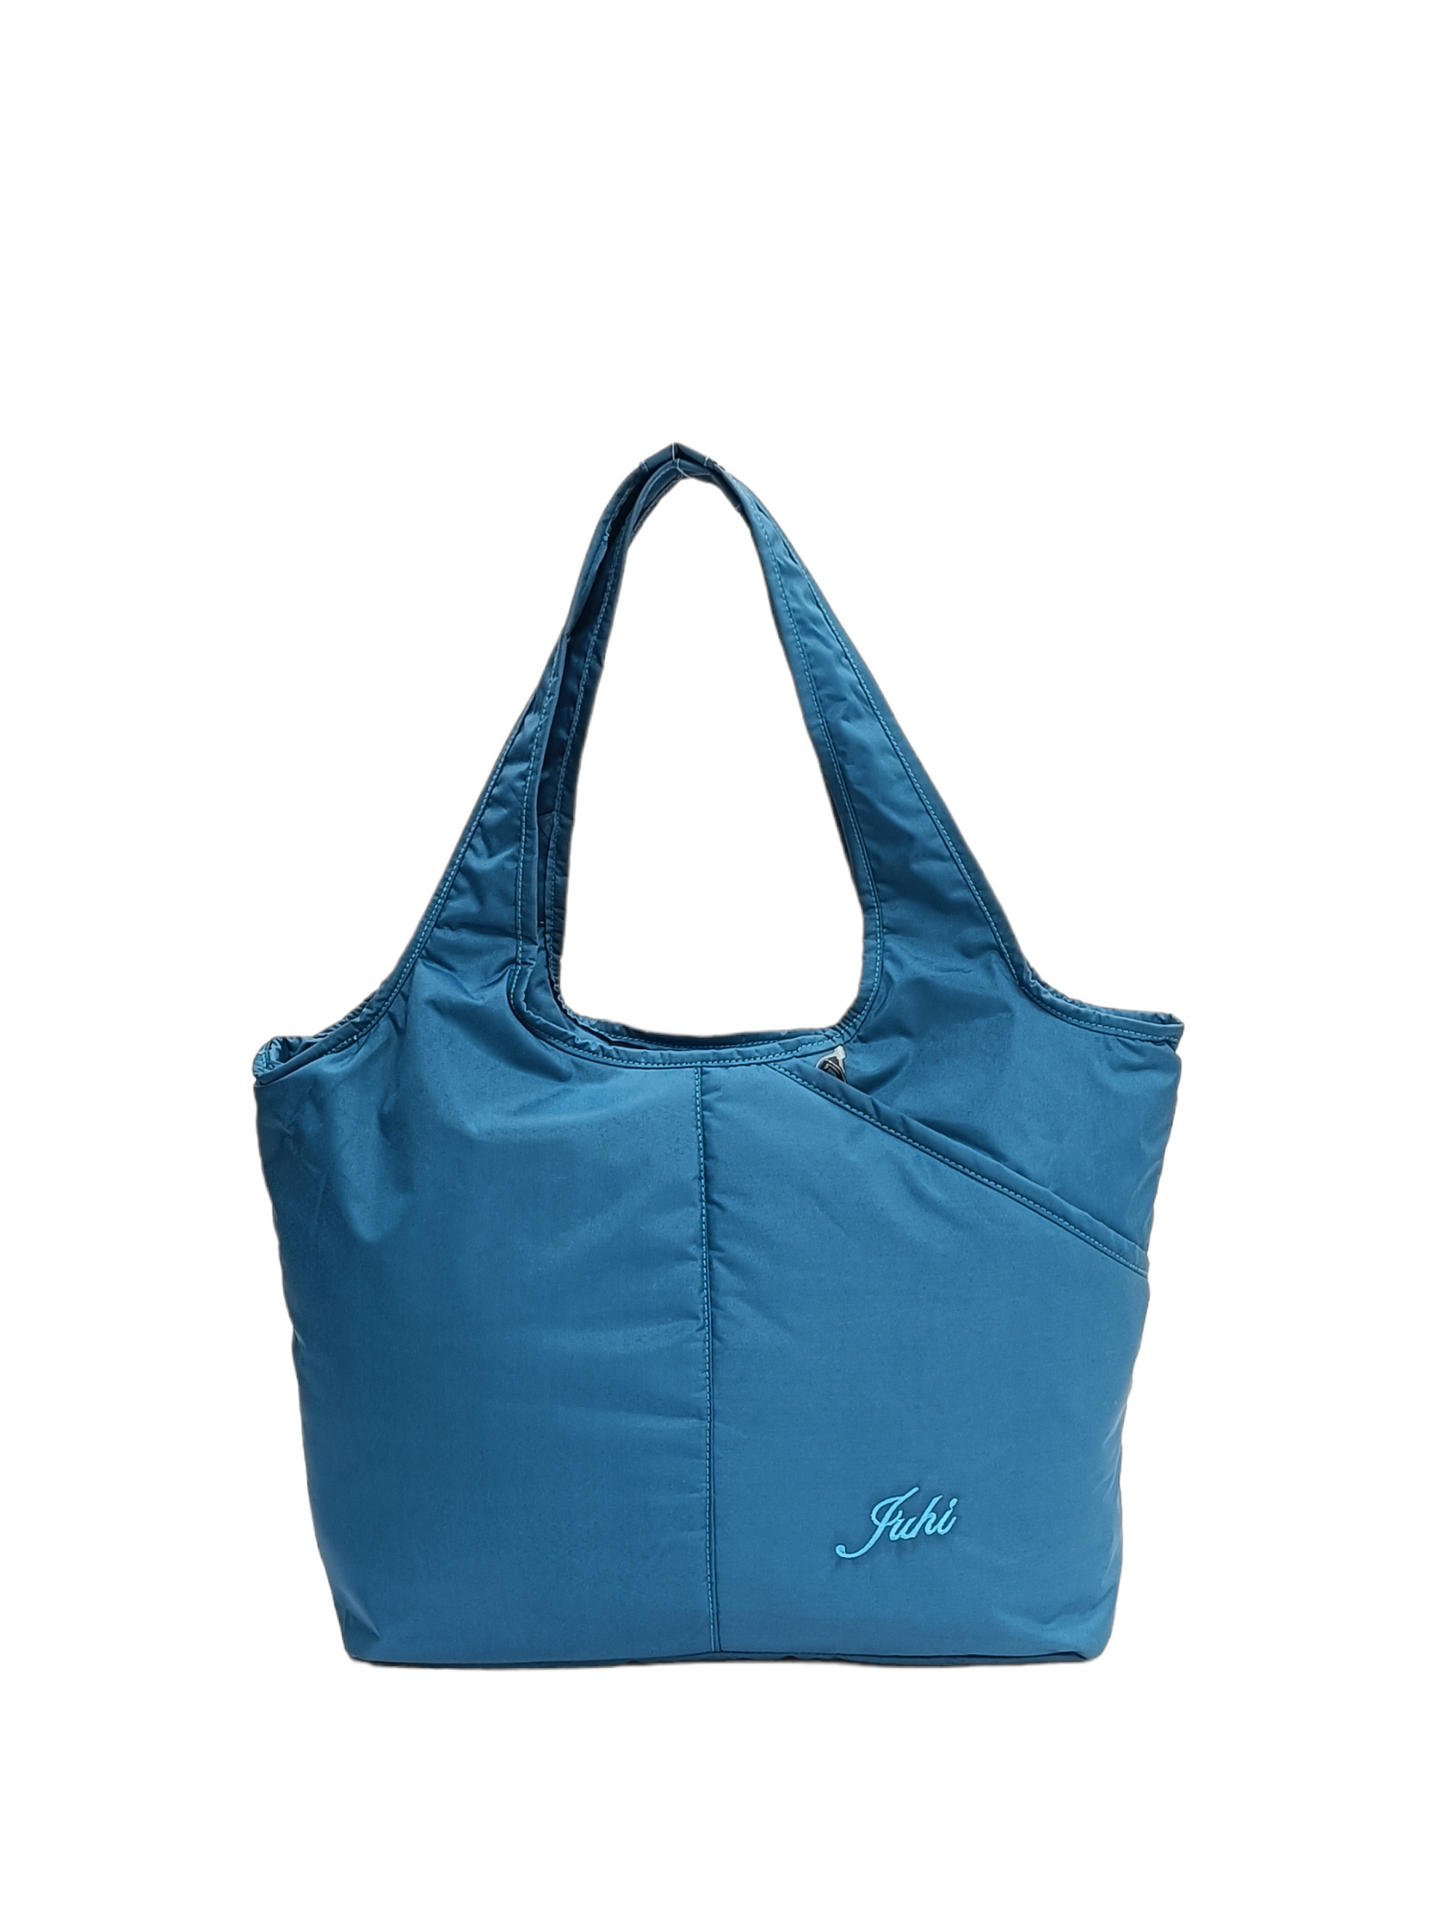 Juhi handbag with 6 pocket with seperate bottle compartment